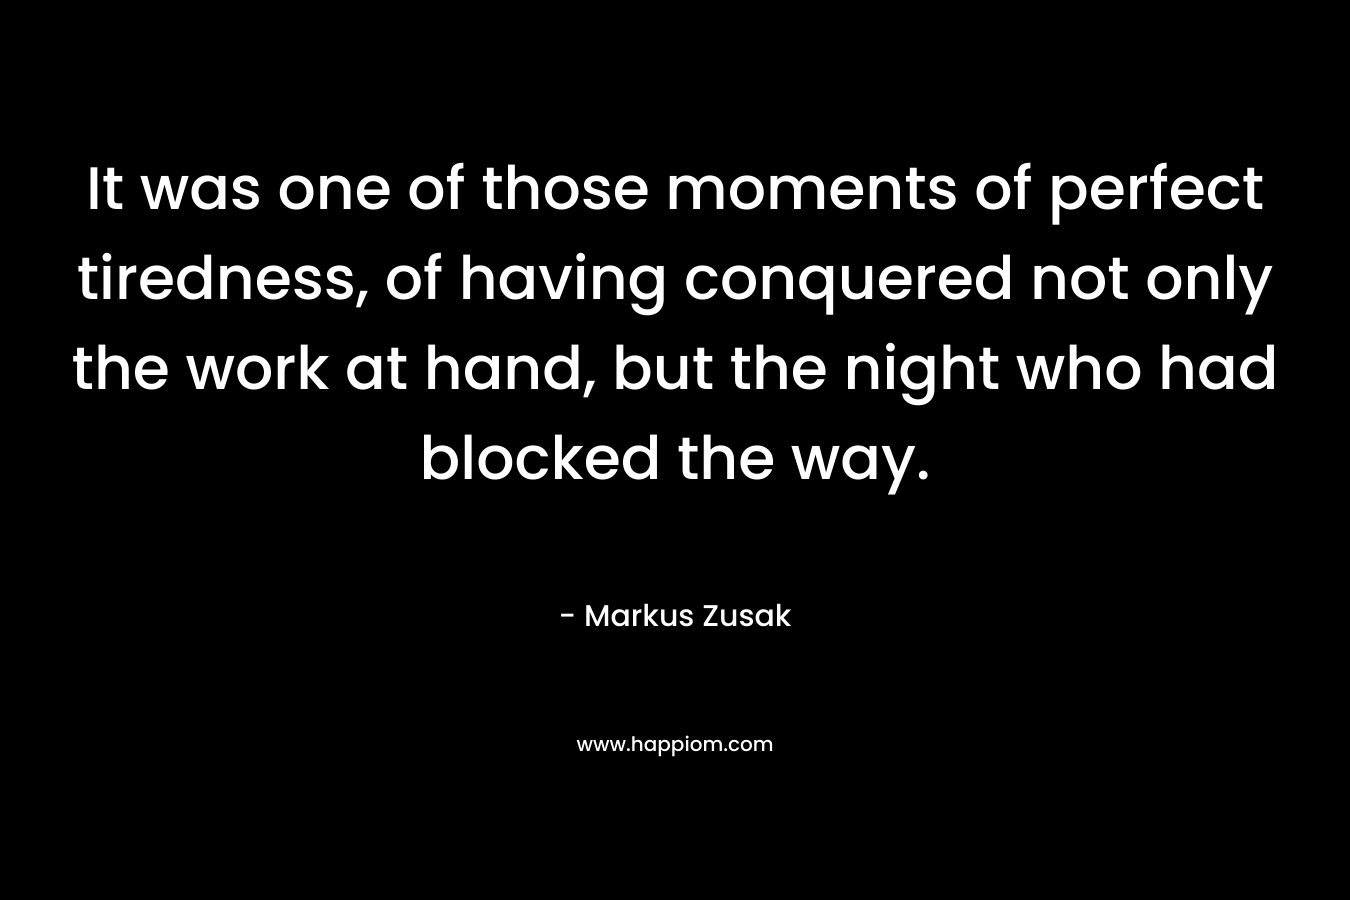 It was one of those moments of perfect tiredness, of having conquered not only the work at hand, but the night who had blocked the way. – Markus Zusak